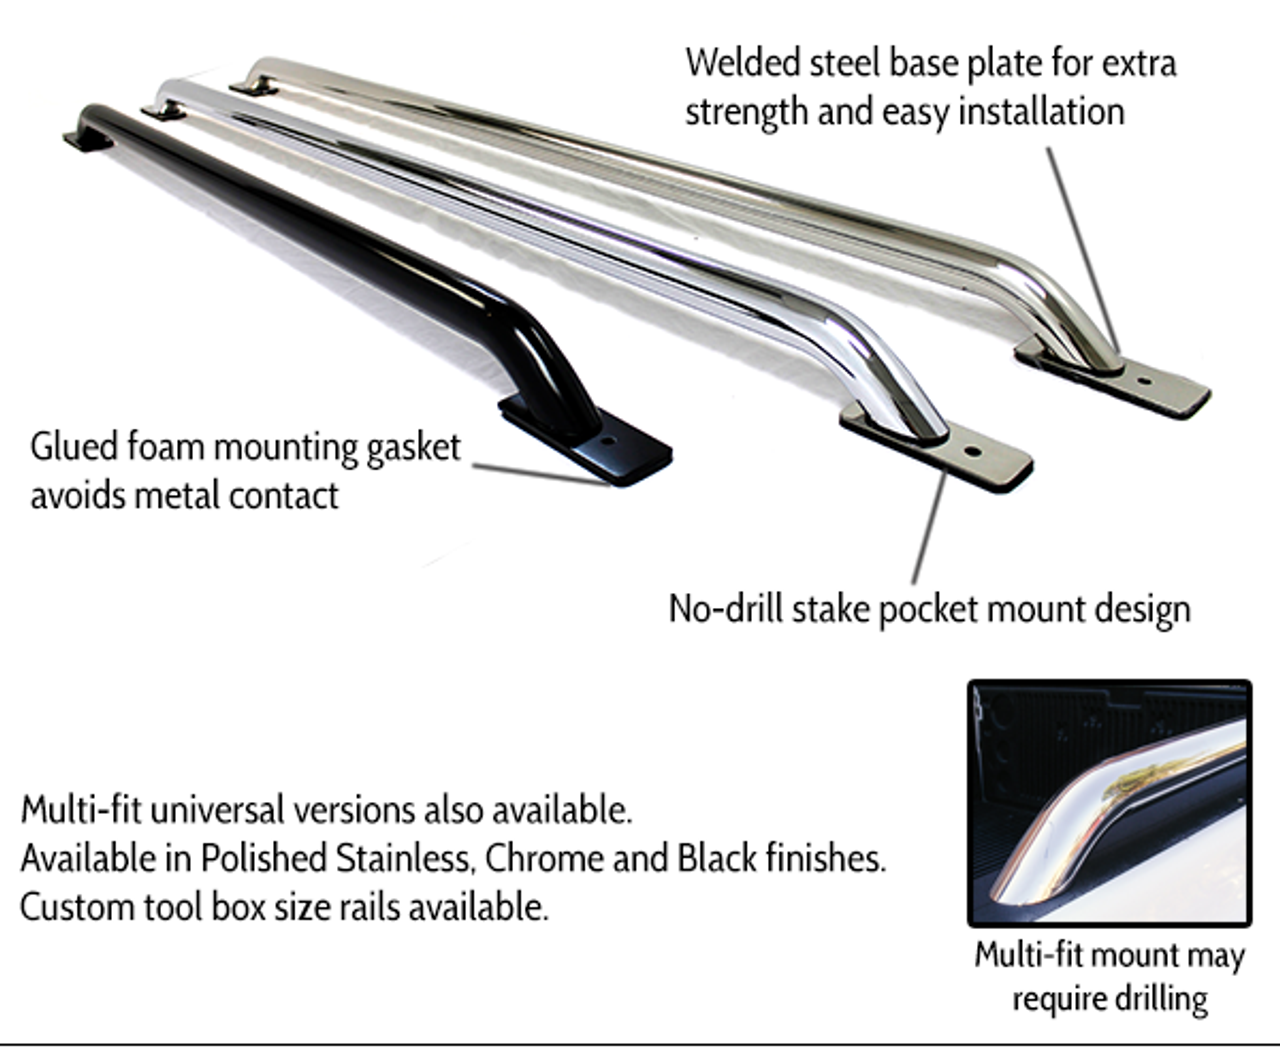 Go Rhino 8048UC Universal Bed Rails, 47 Inch Long, Without base plates, Chrome Mild Steel, Mounting Kit Included, Fits Ford Chevrolet Toyota Jeep, Dodge, Nissan, Buick GMC